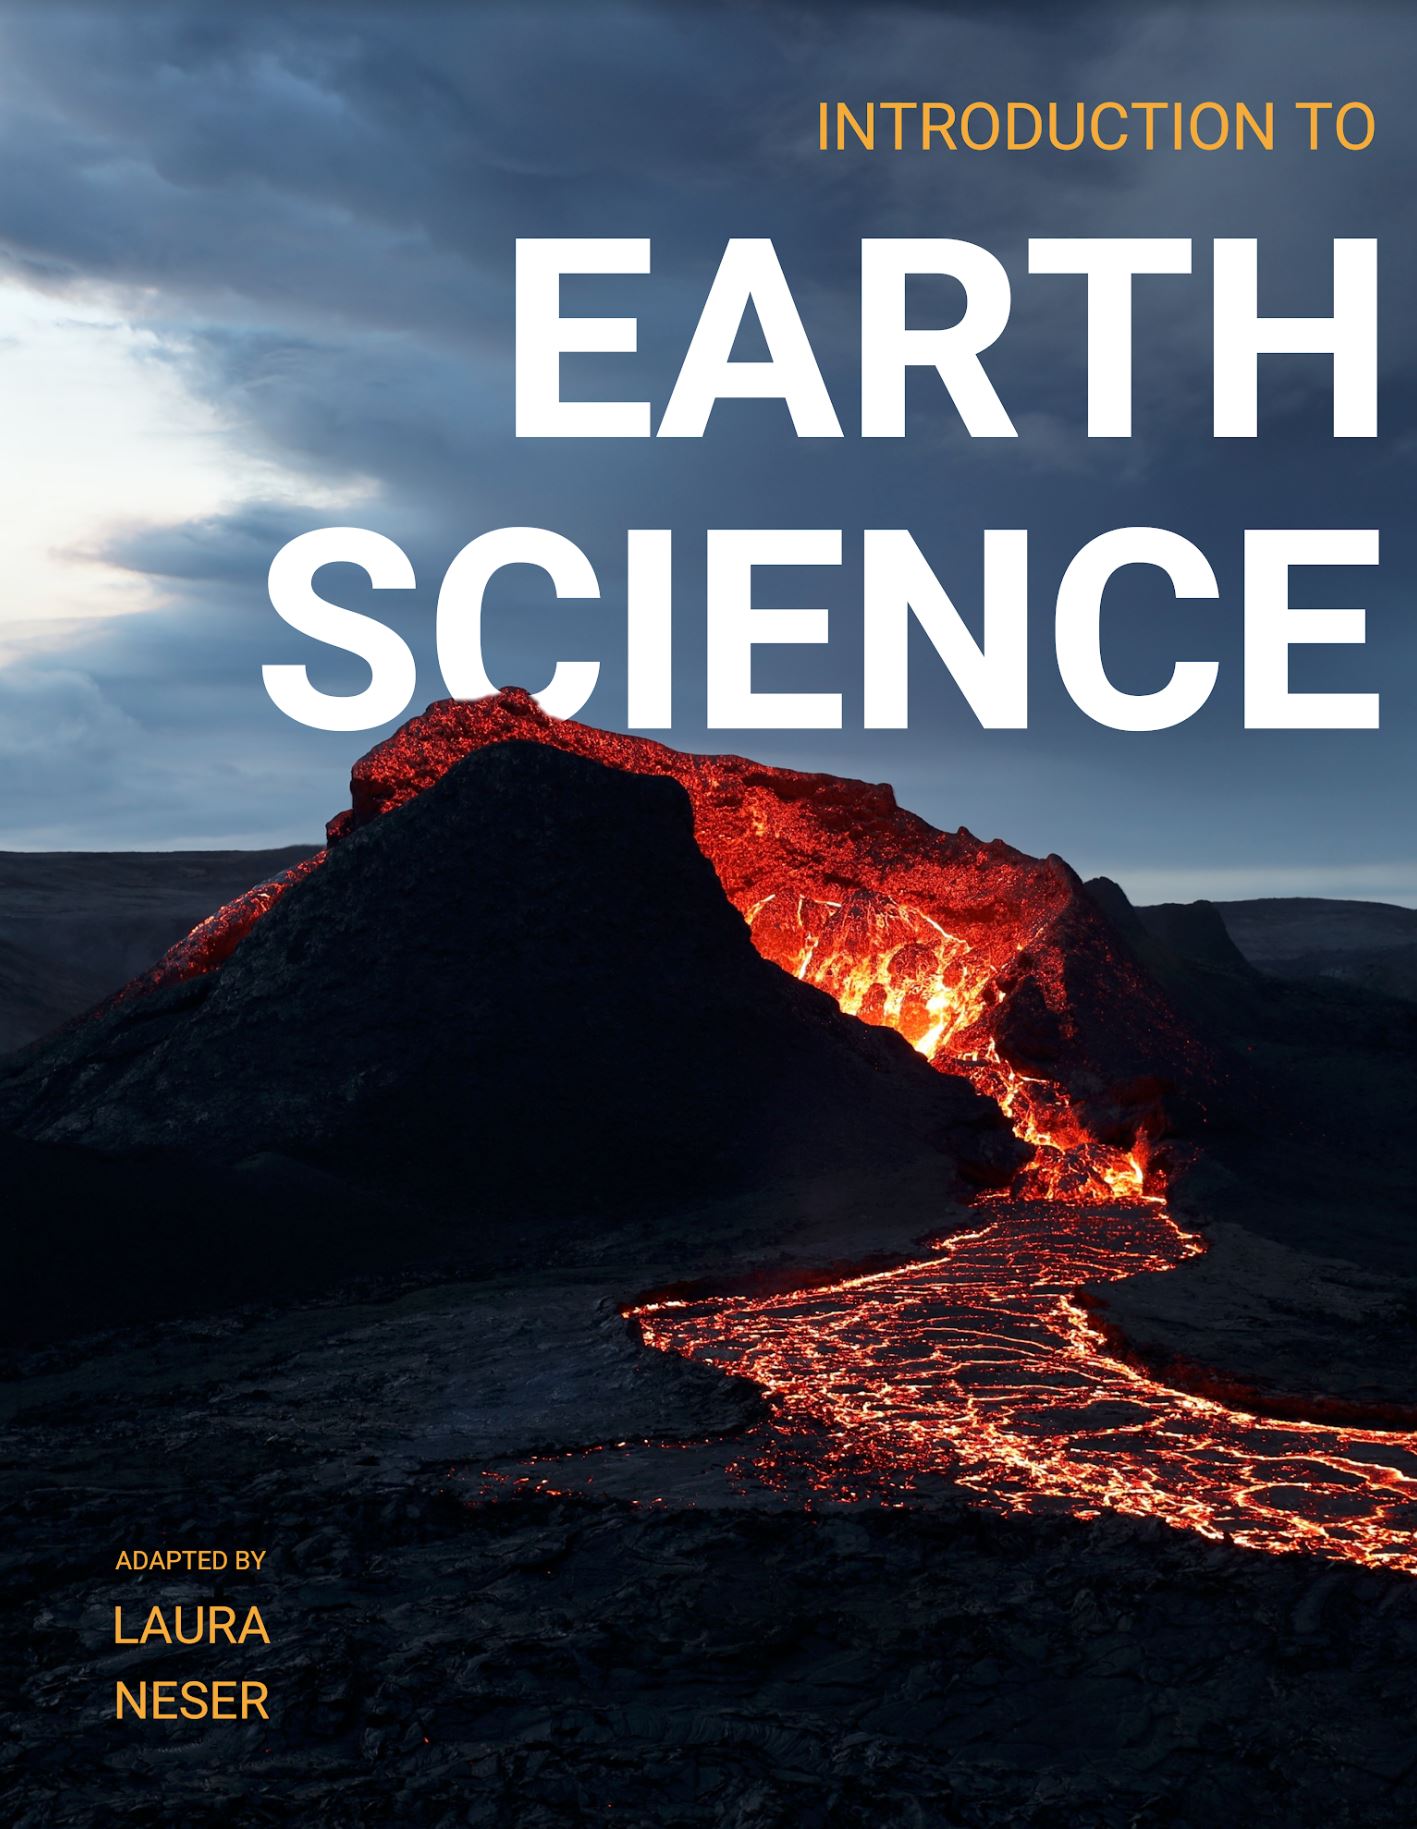 Read more about Introduction to Earth Science